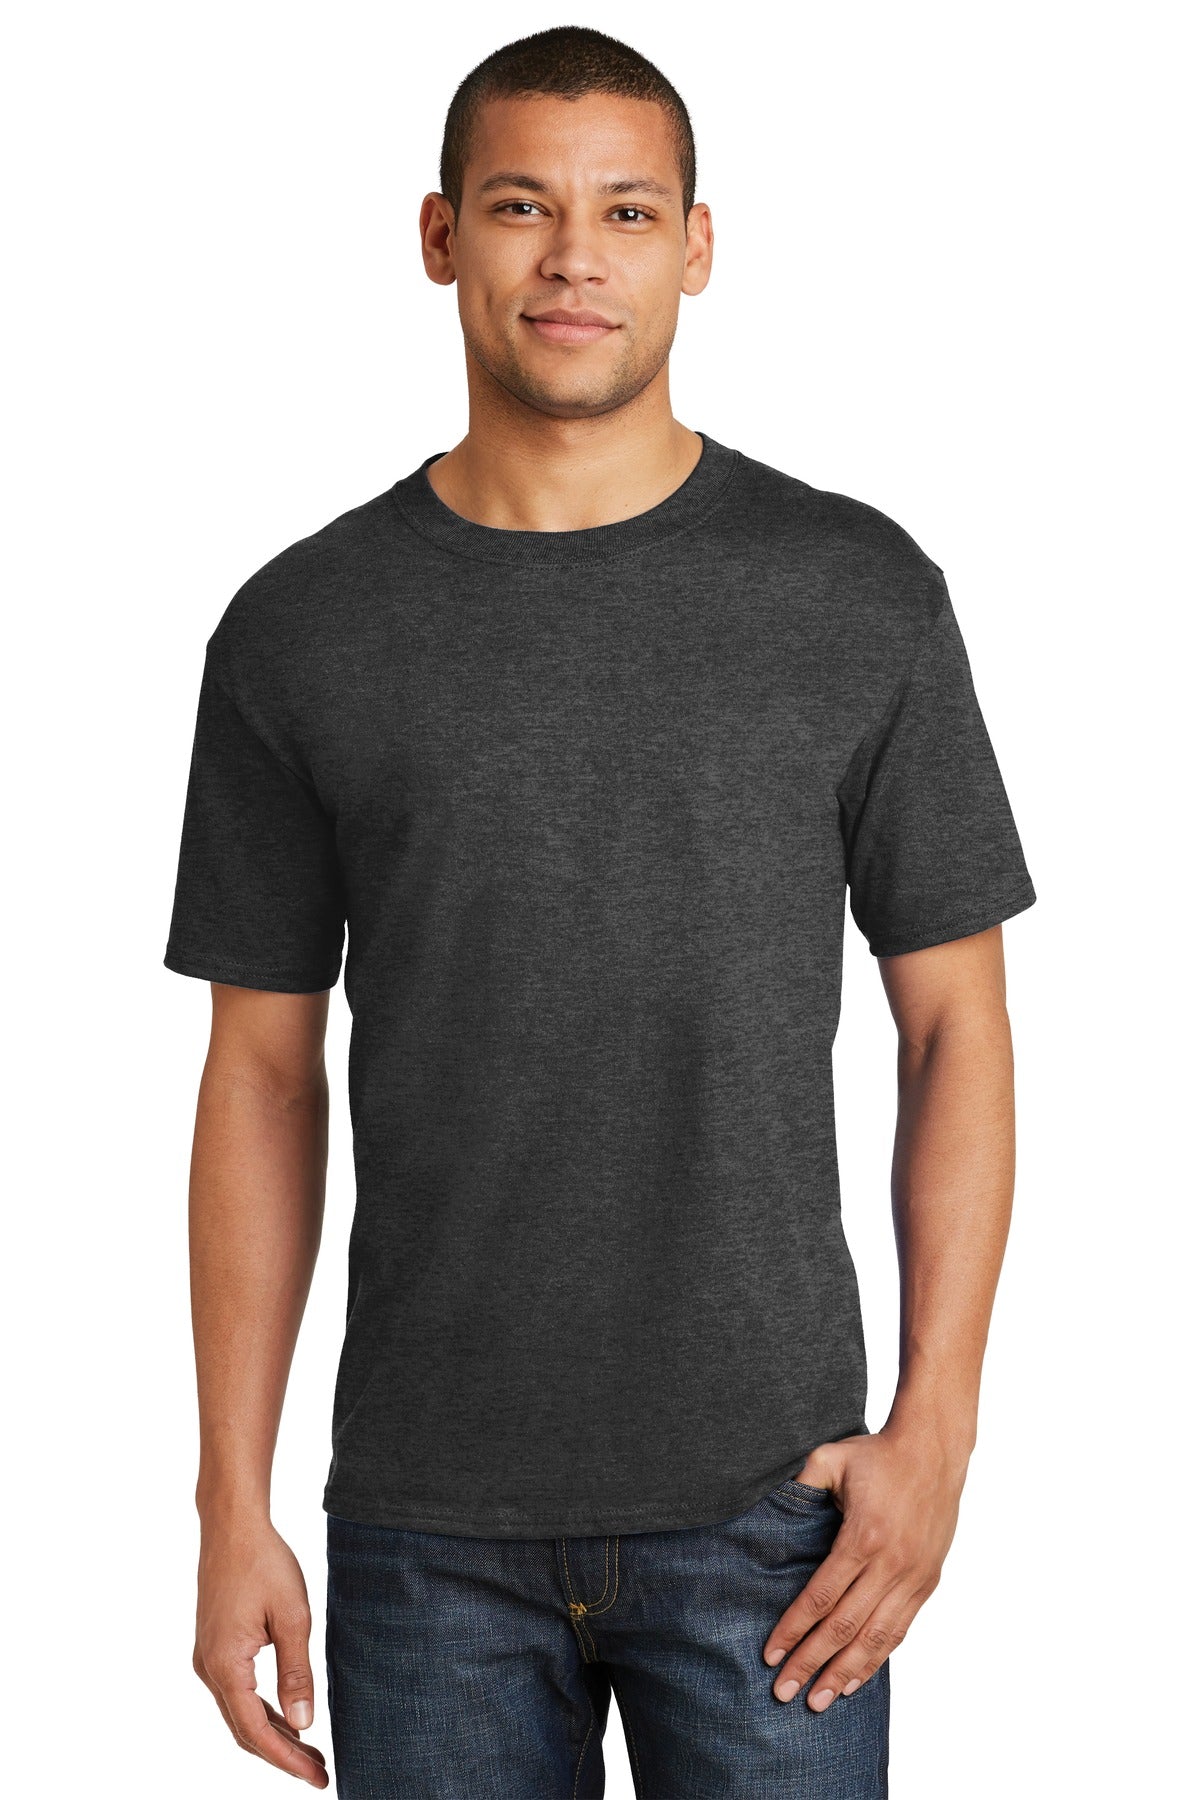 T-Shirts Charcoal Heather*** Hanes